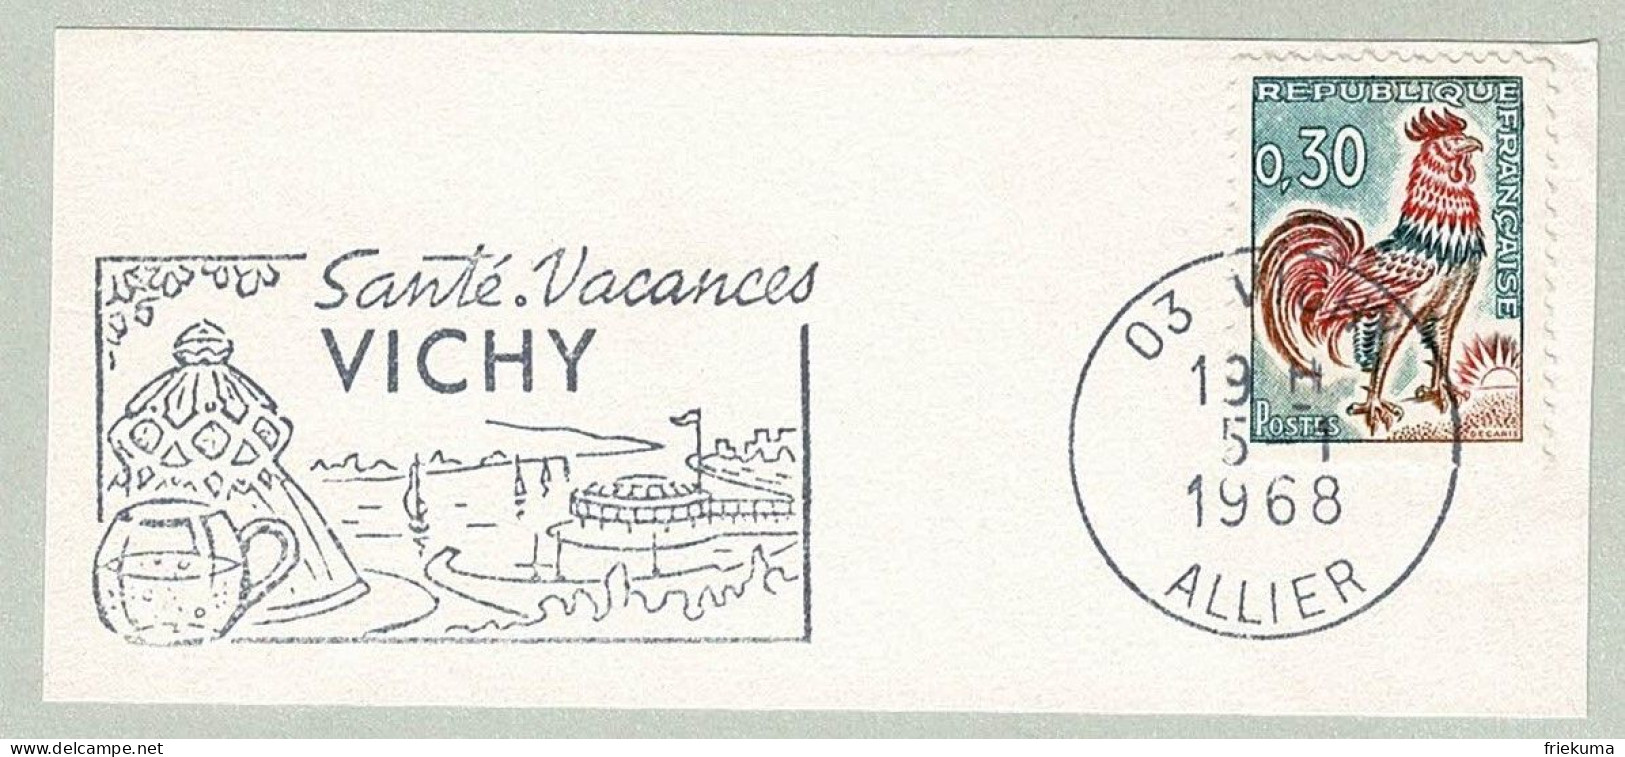 Frankreich / France 1968, Flaggenstempel Vichy, Thermalbad / Centre Thermal - Hydrotherapy